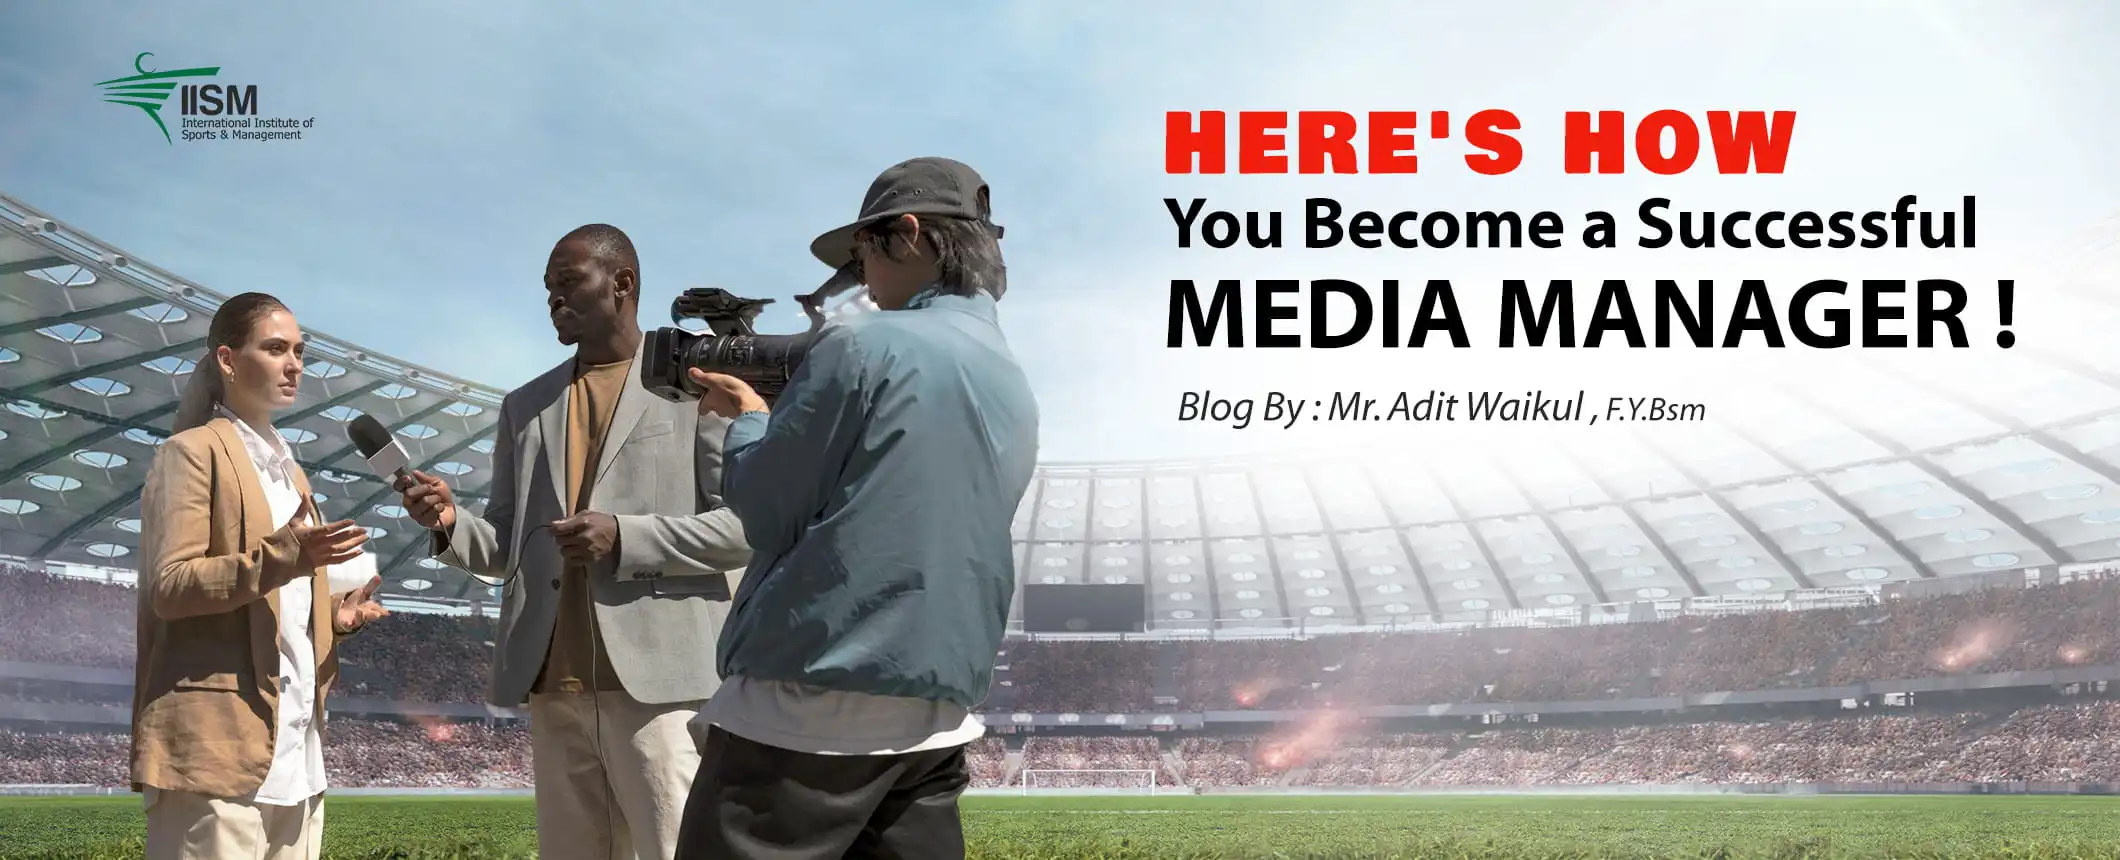 Tips to Become a Media Manager